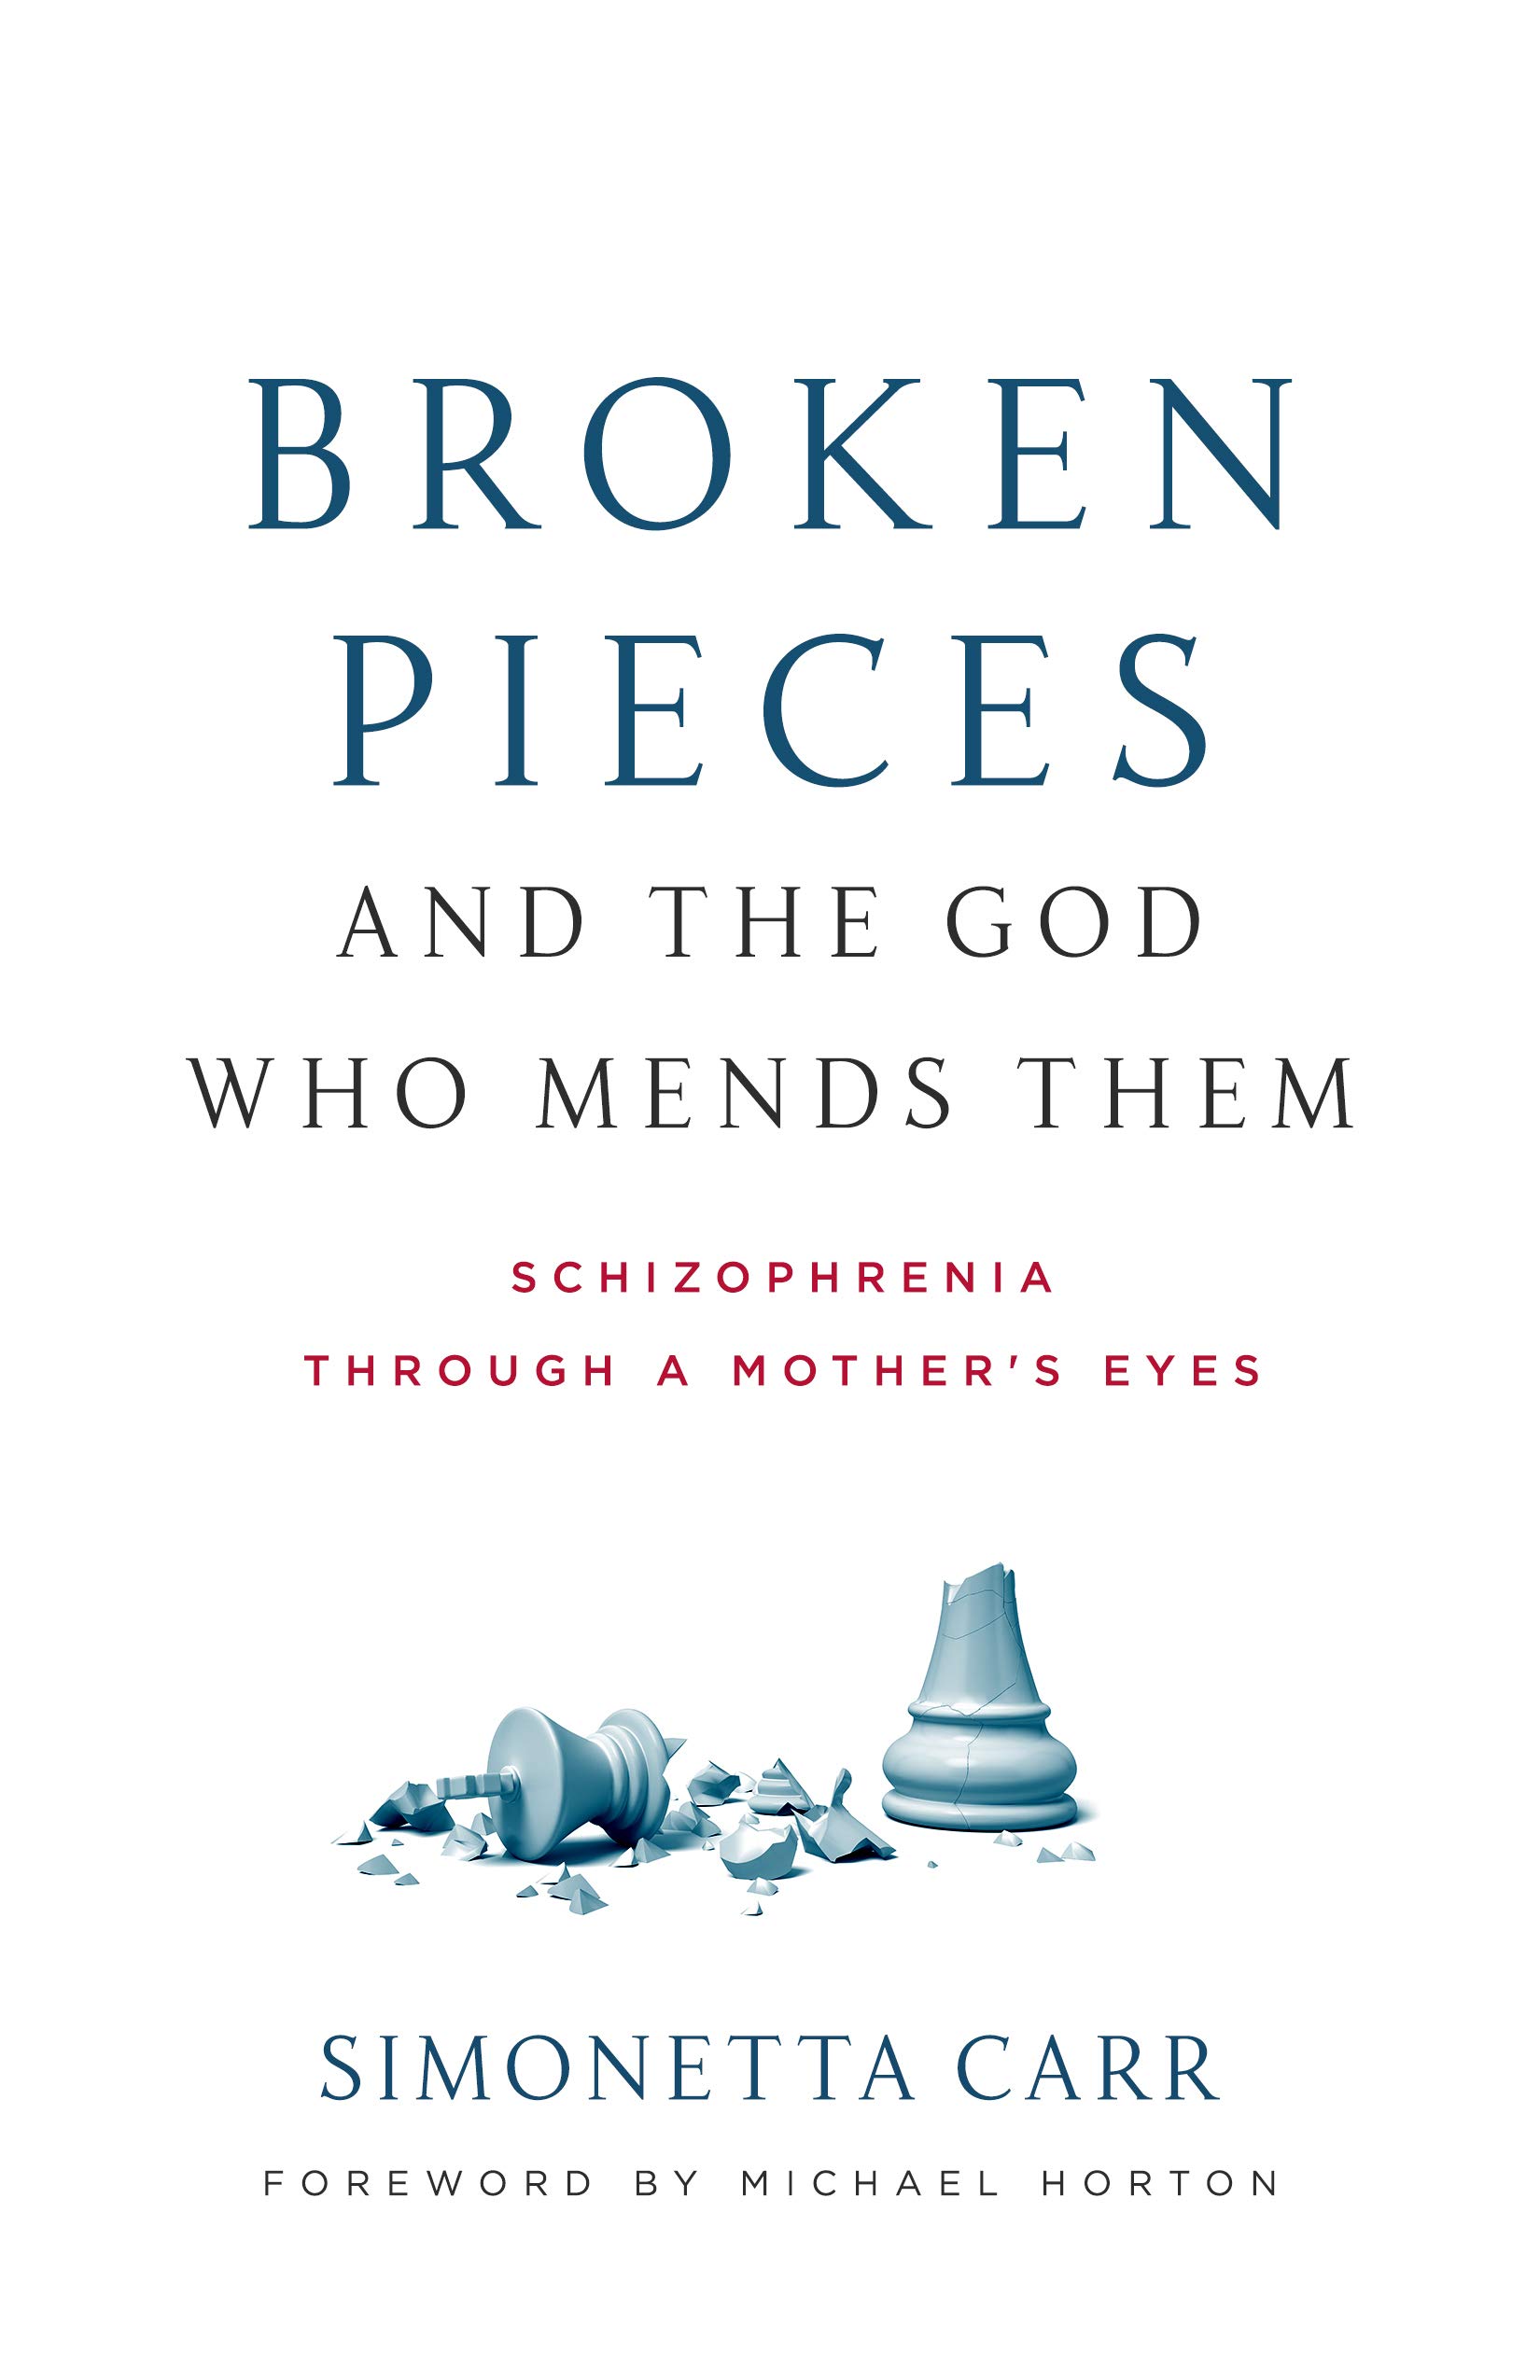 Book Notice: BROKEN PIECES AND THE GOD WHO MENDS THEM: SCHIZOPHRENIA THROUGH A MOTHER’S EYES, by Simonetta Carr